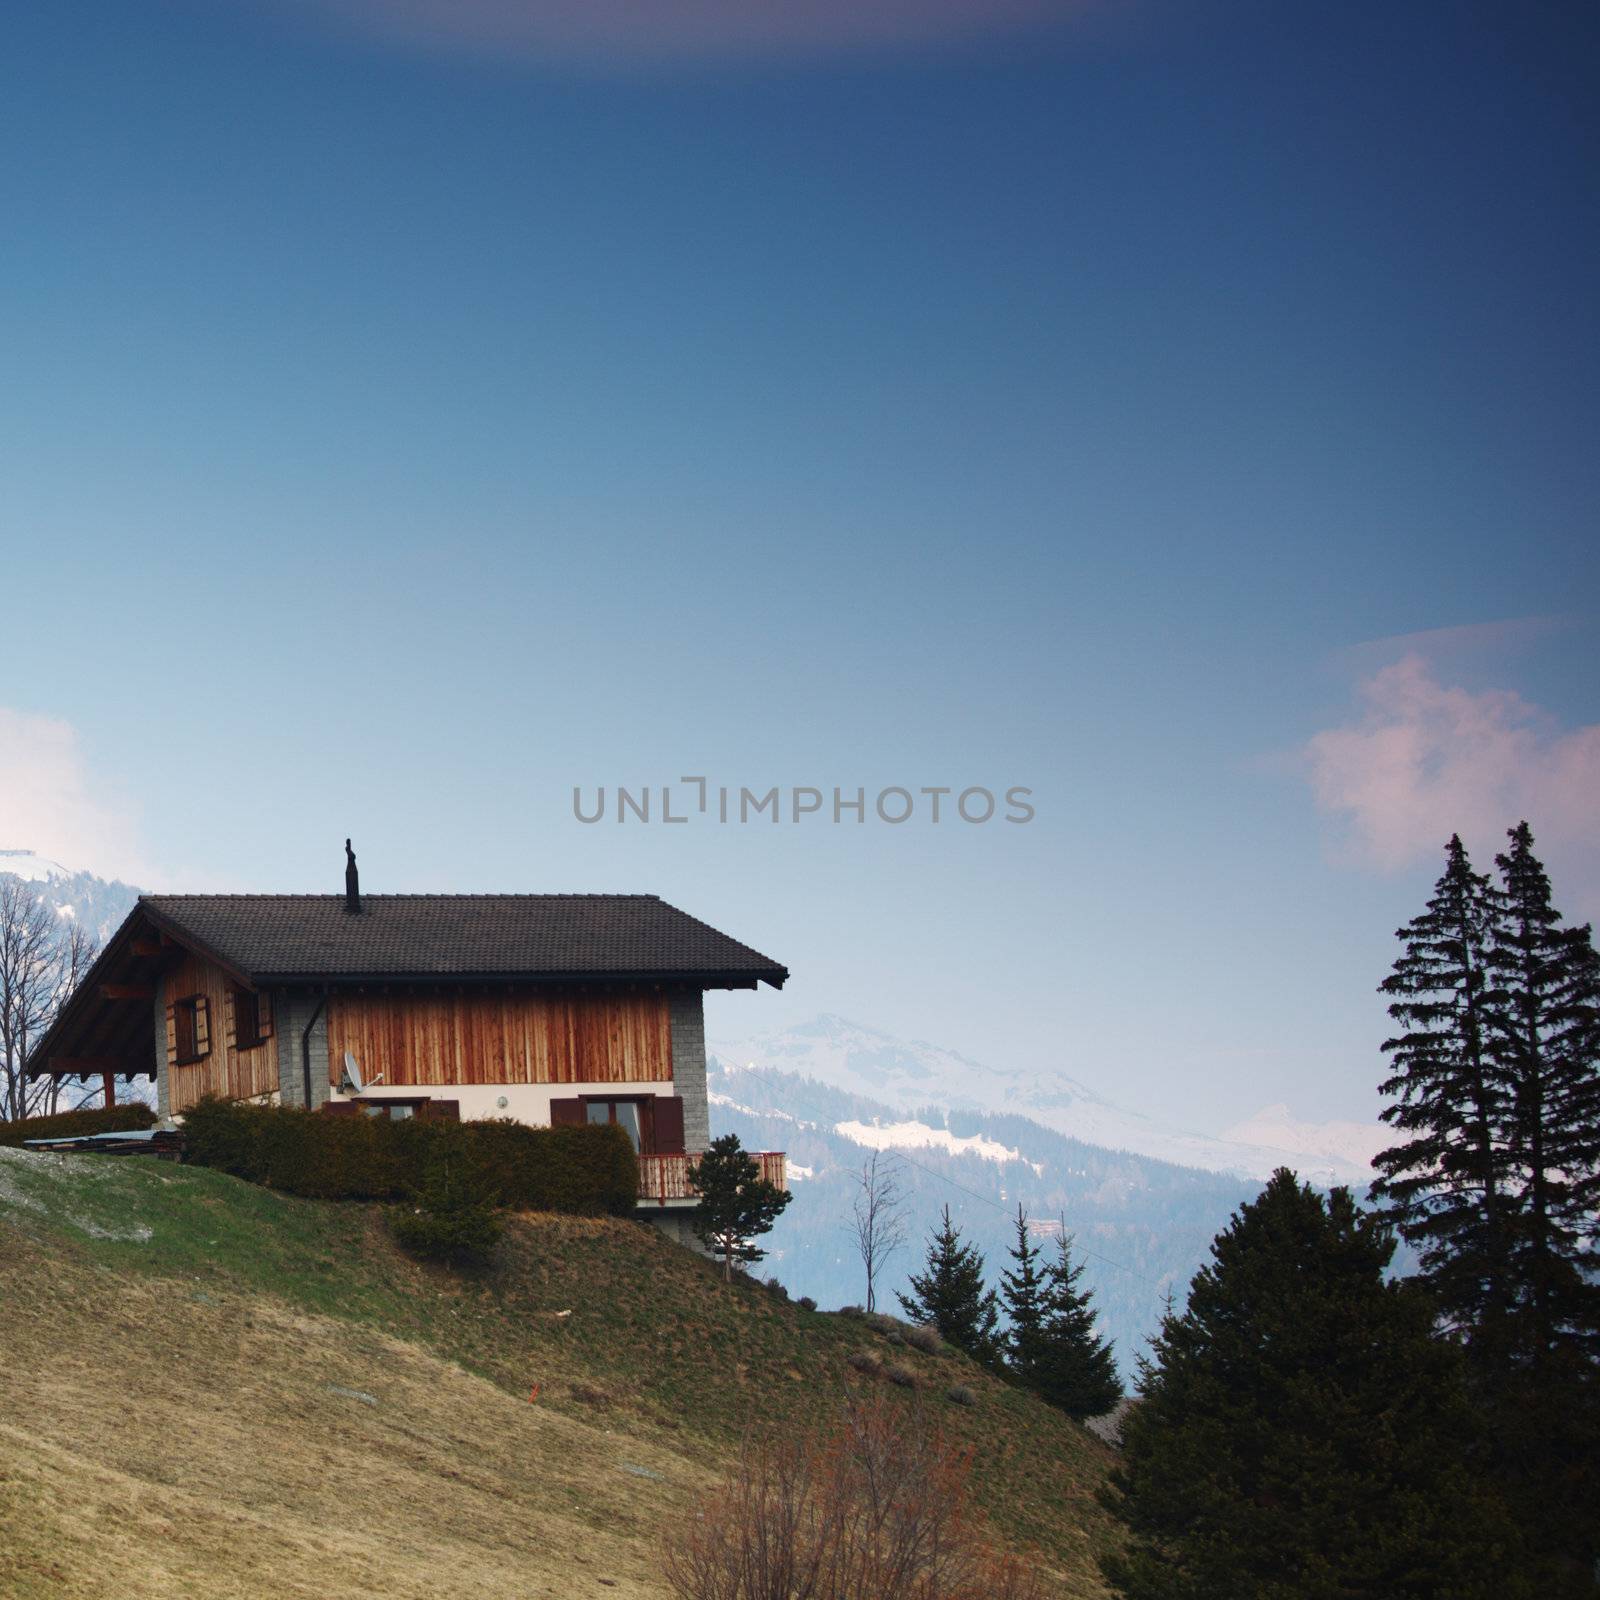 chalet in mountains by Yellowj